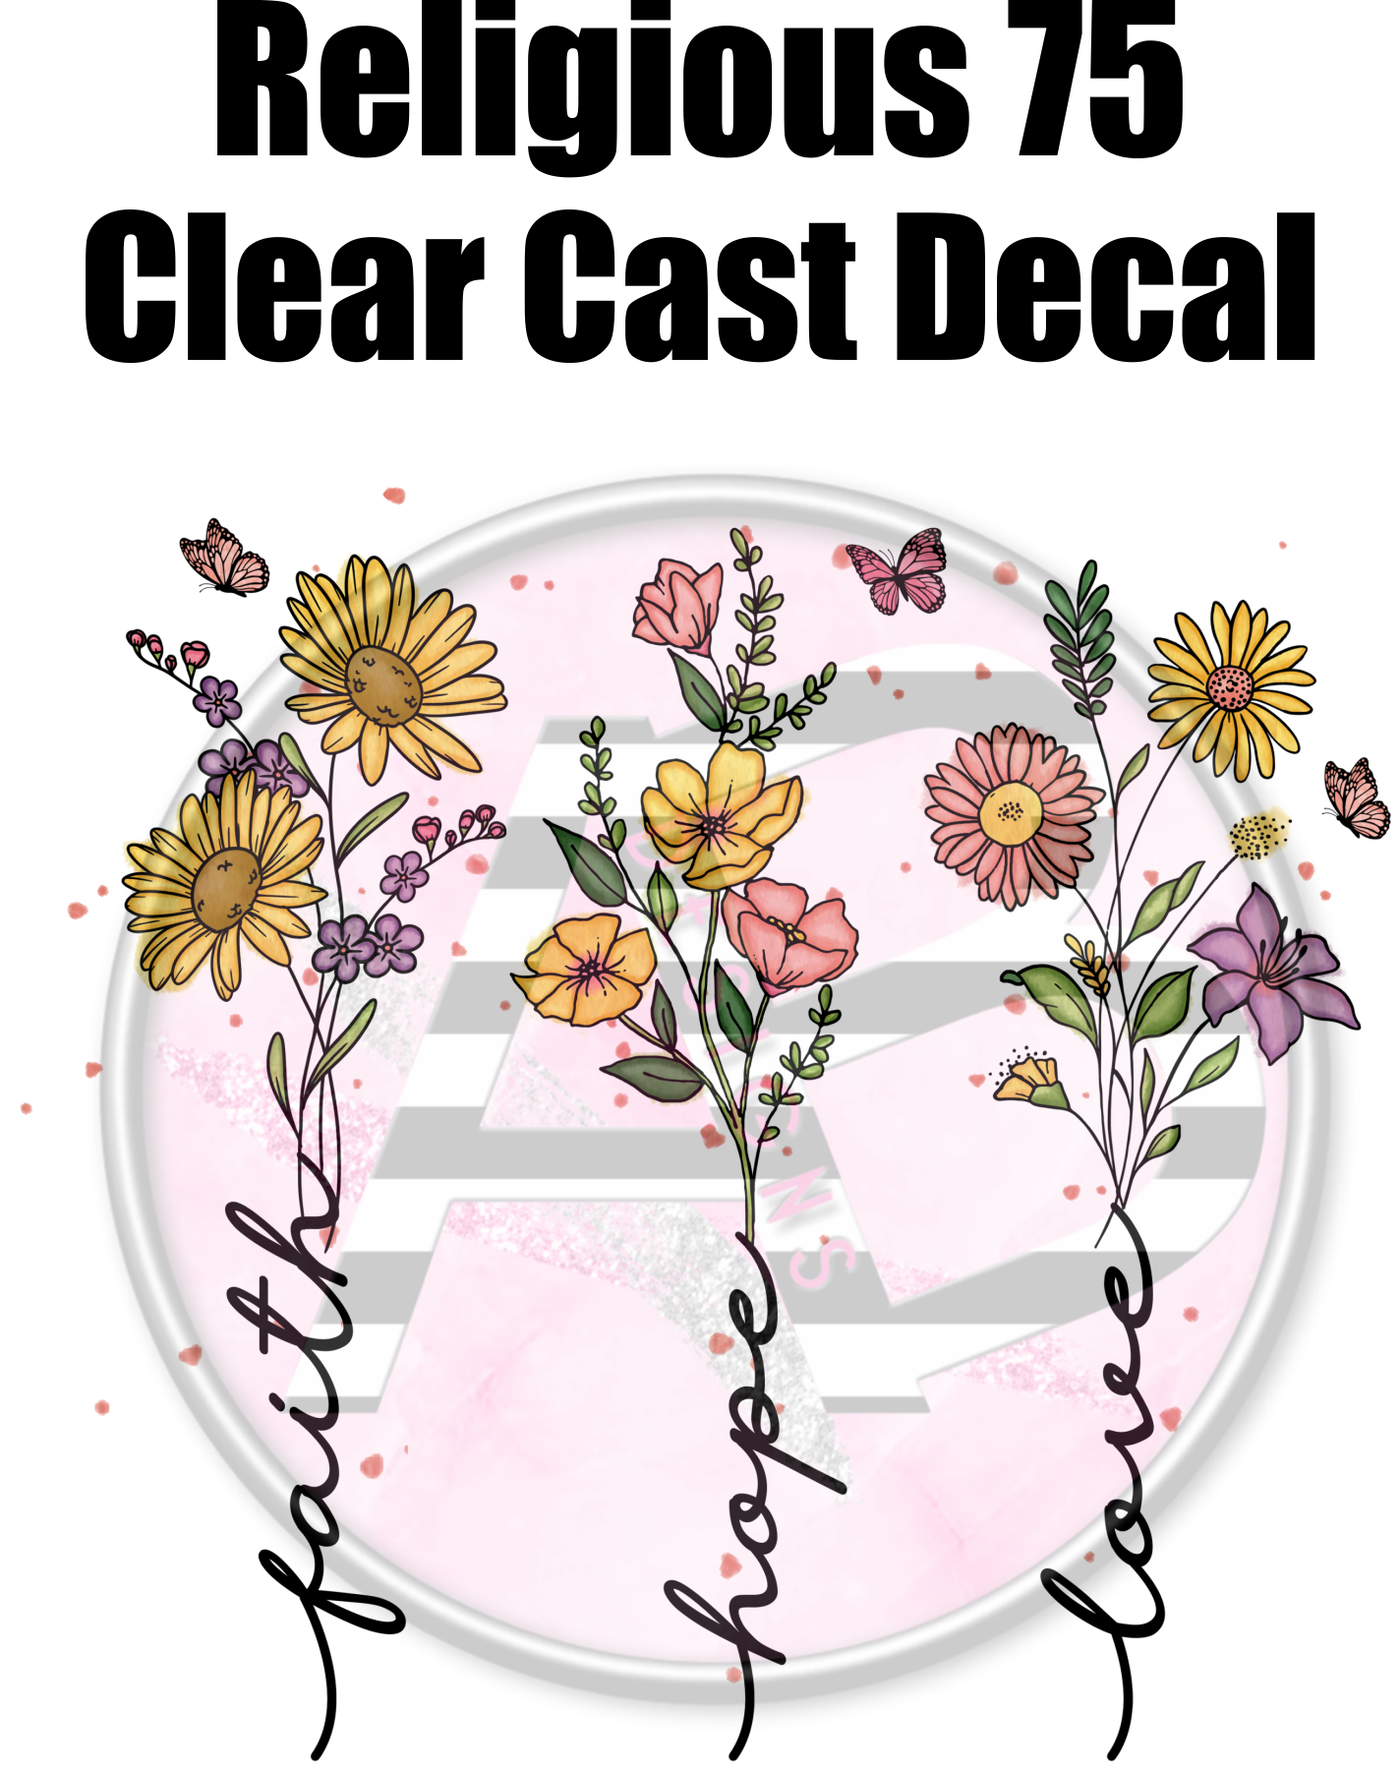 Religious 75 - Clear Cast Decal - 231